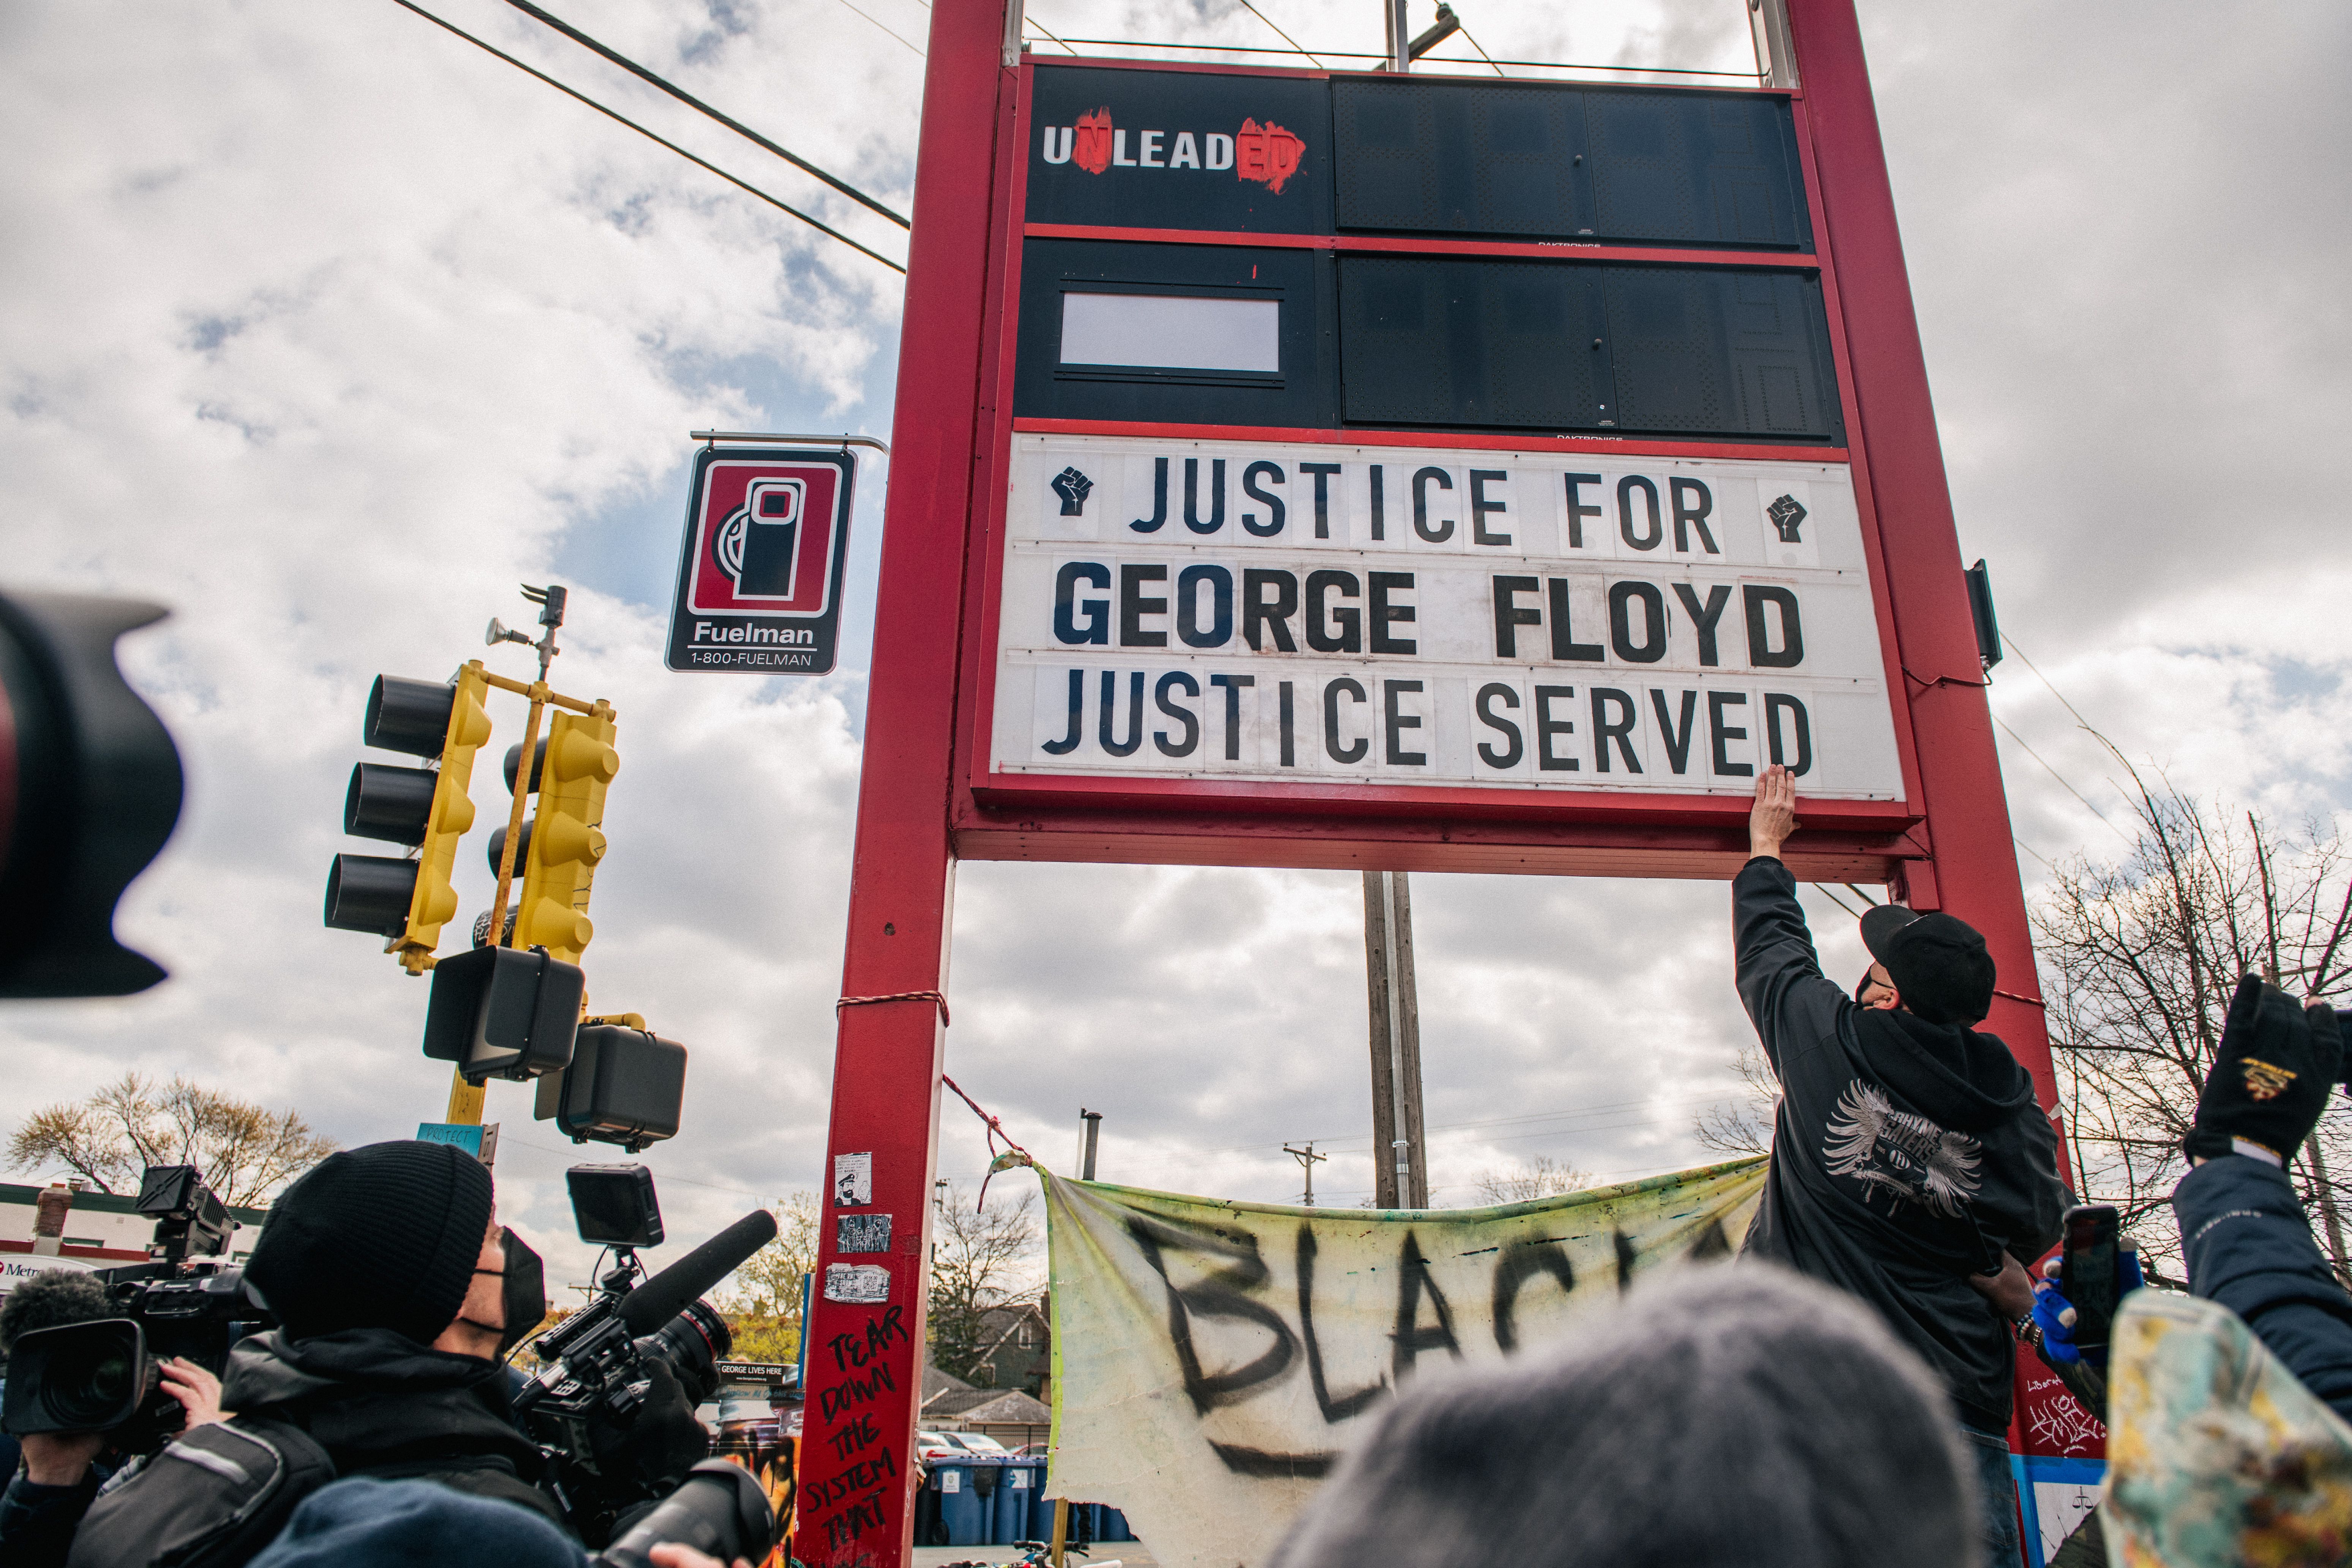 People celebrate the guilty verdict in the Dereck Chauvin trail at the intersection of 38th Street and Chicago Avenue on April 20, 2021 in Minneapolis, Minnesota.